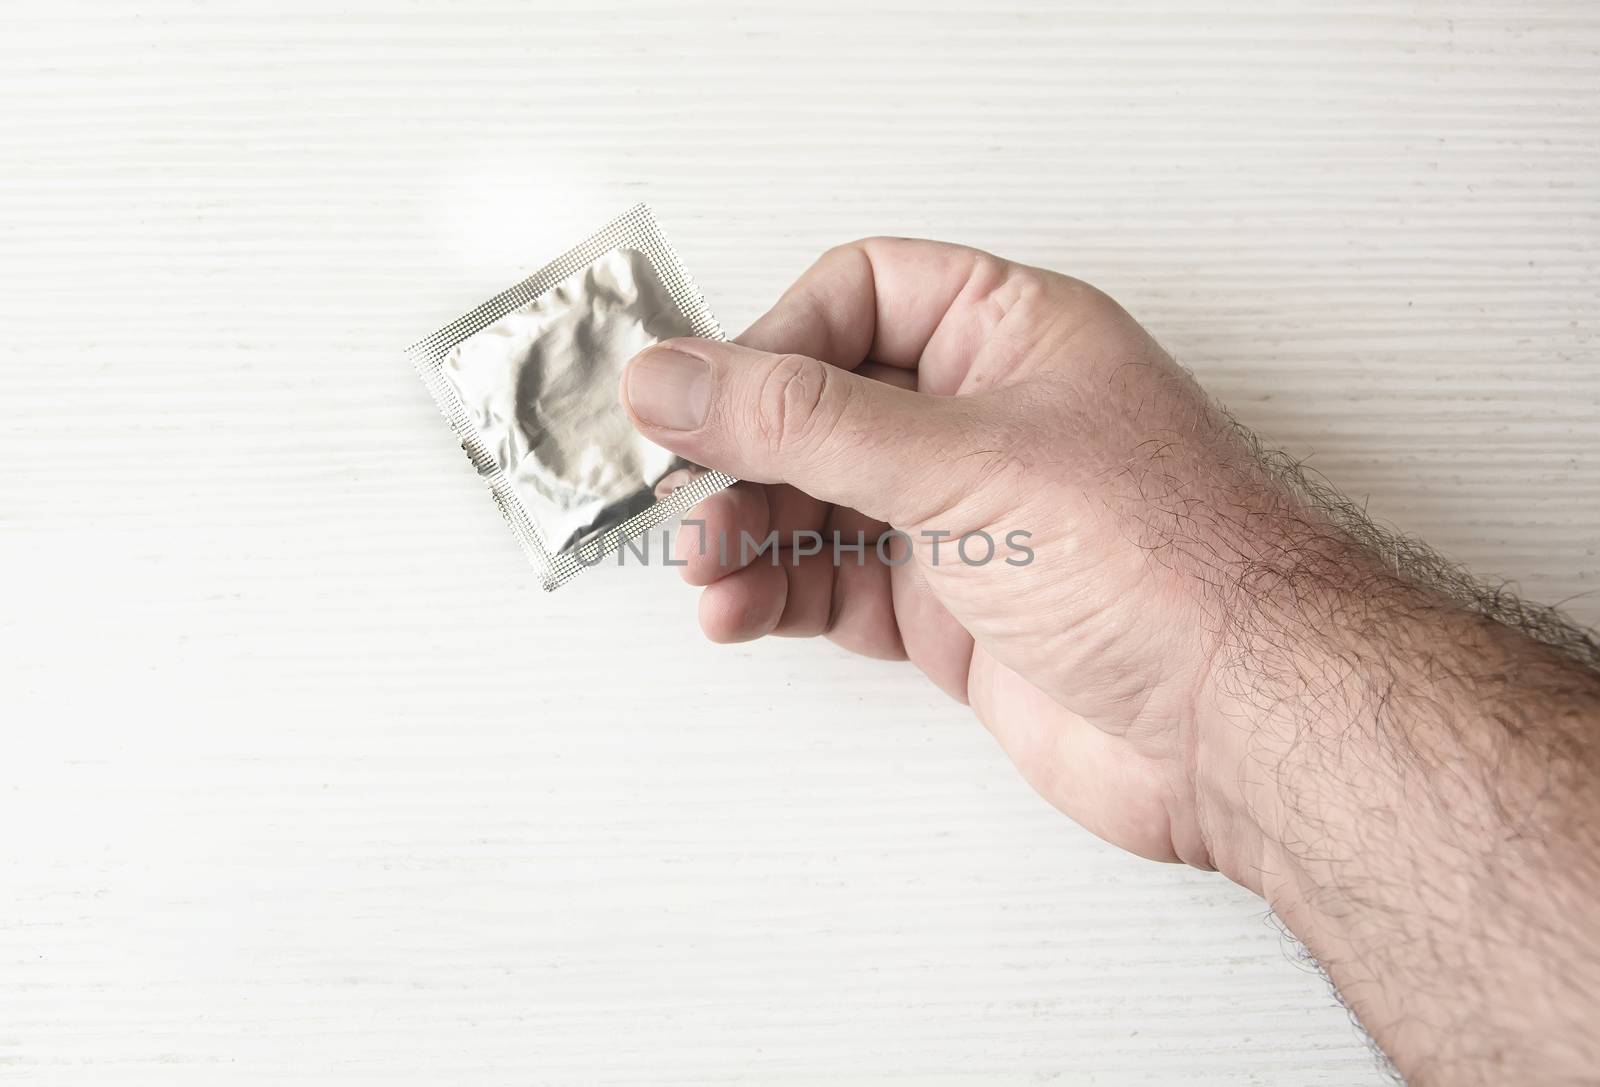 A male hand holding a condom packed. Health and contraception. Prevention of sexually transmitted diseases. Safe sex